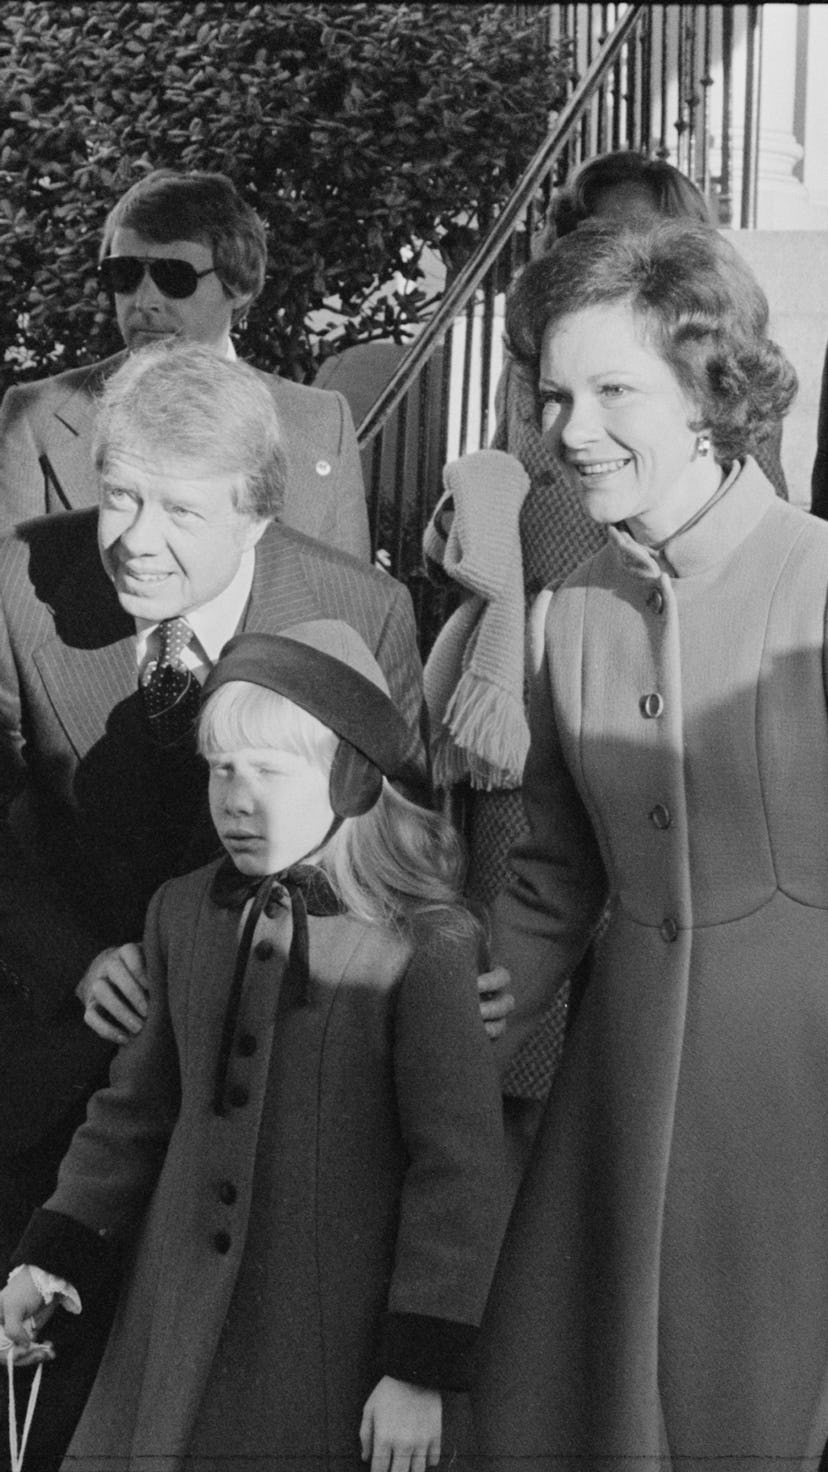 Jimmy Carter arrives to his inauguration with wife Rosalynn Carter and daughter Amy Carter.